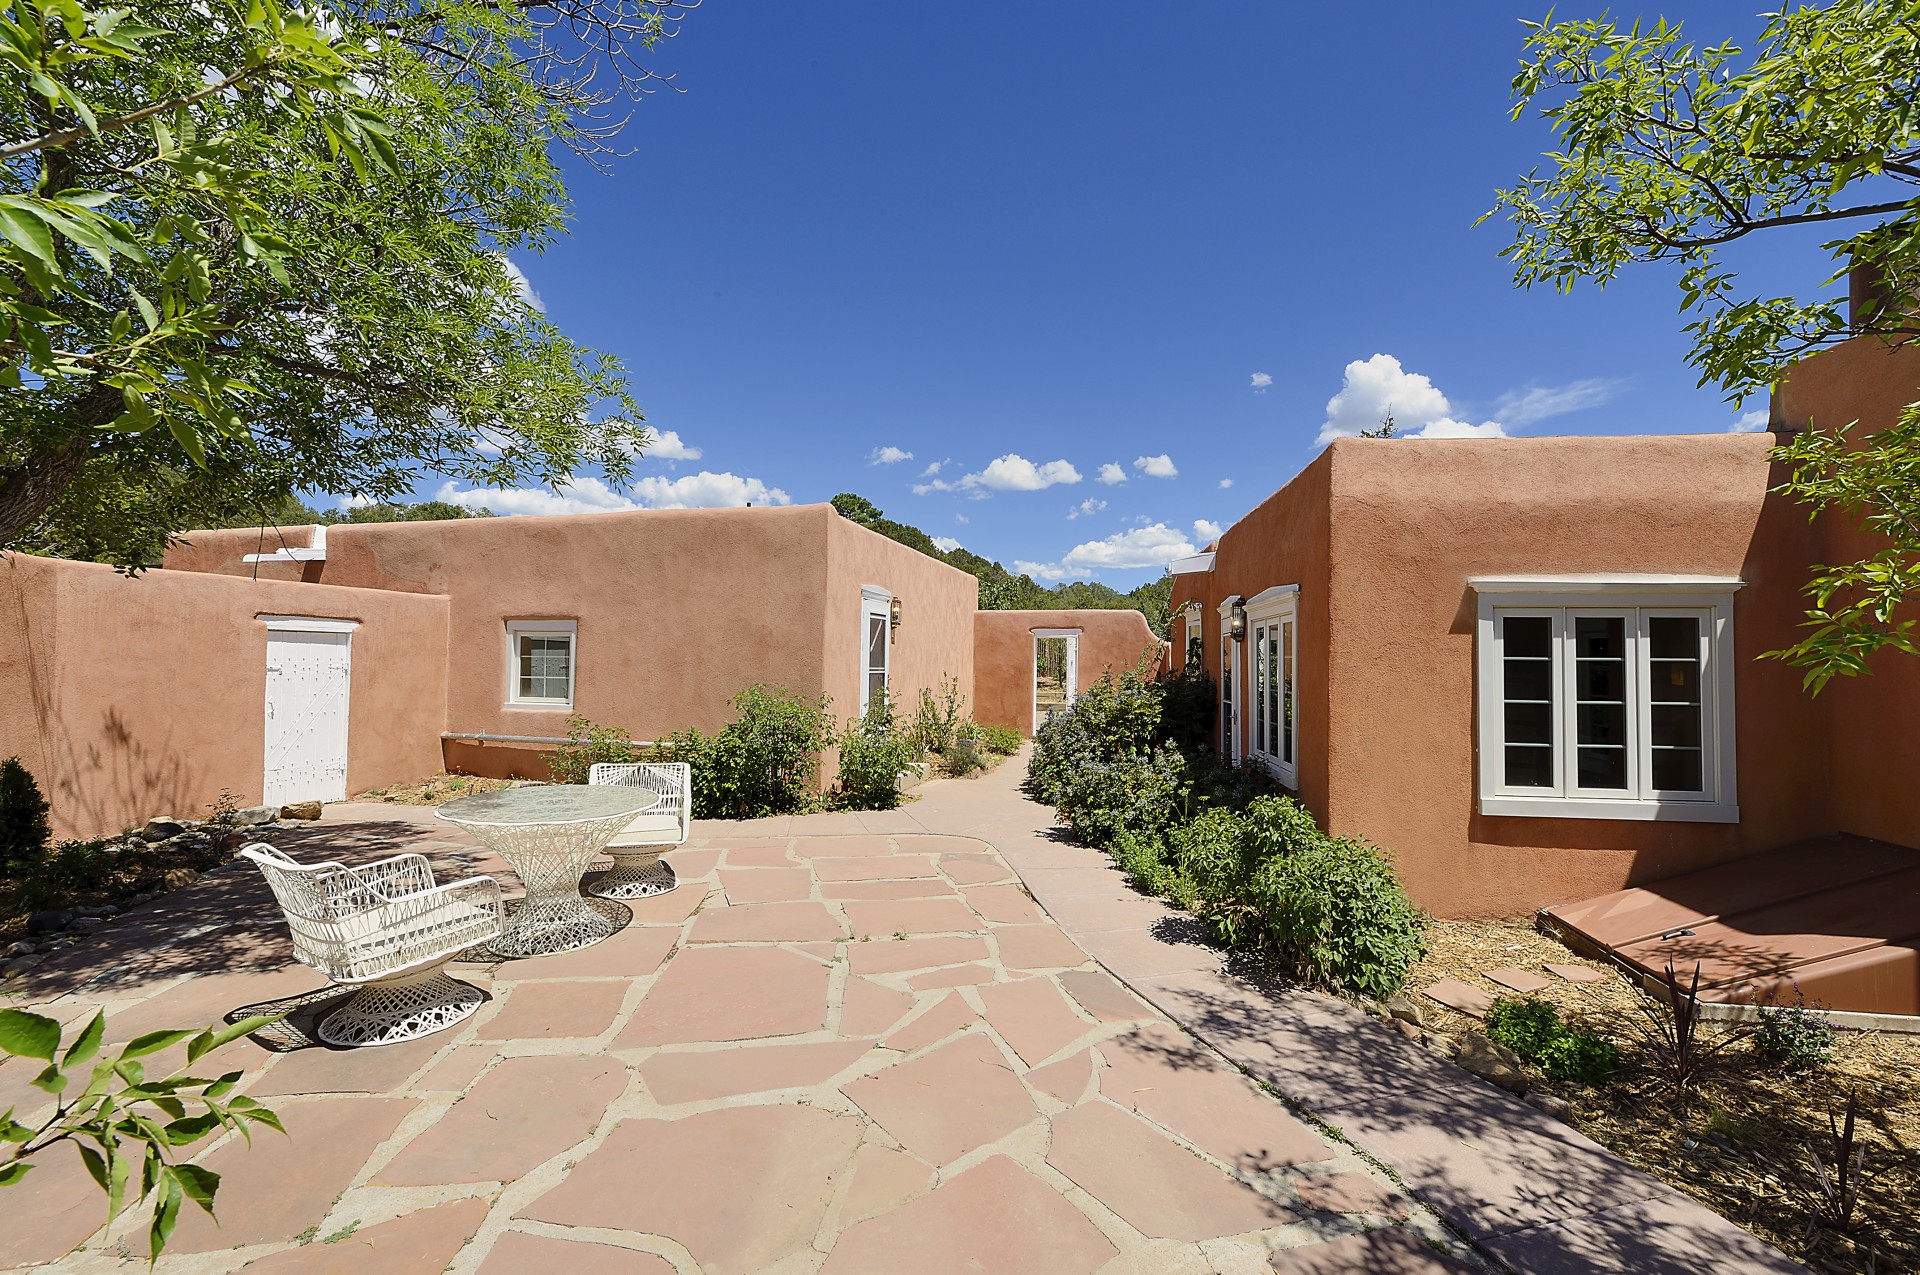 1049 Governor Dempsey, Santa Fe, New Mexico 87501, 4 Bedrooms Bedrooms, ,3 BathroomsBathrooms,Residential,For Sale,1049 Governor Dempsey,202232288